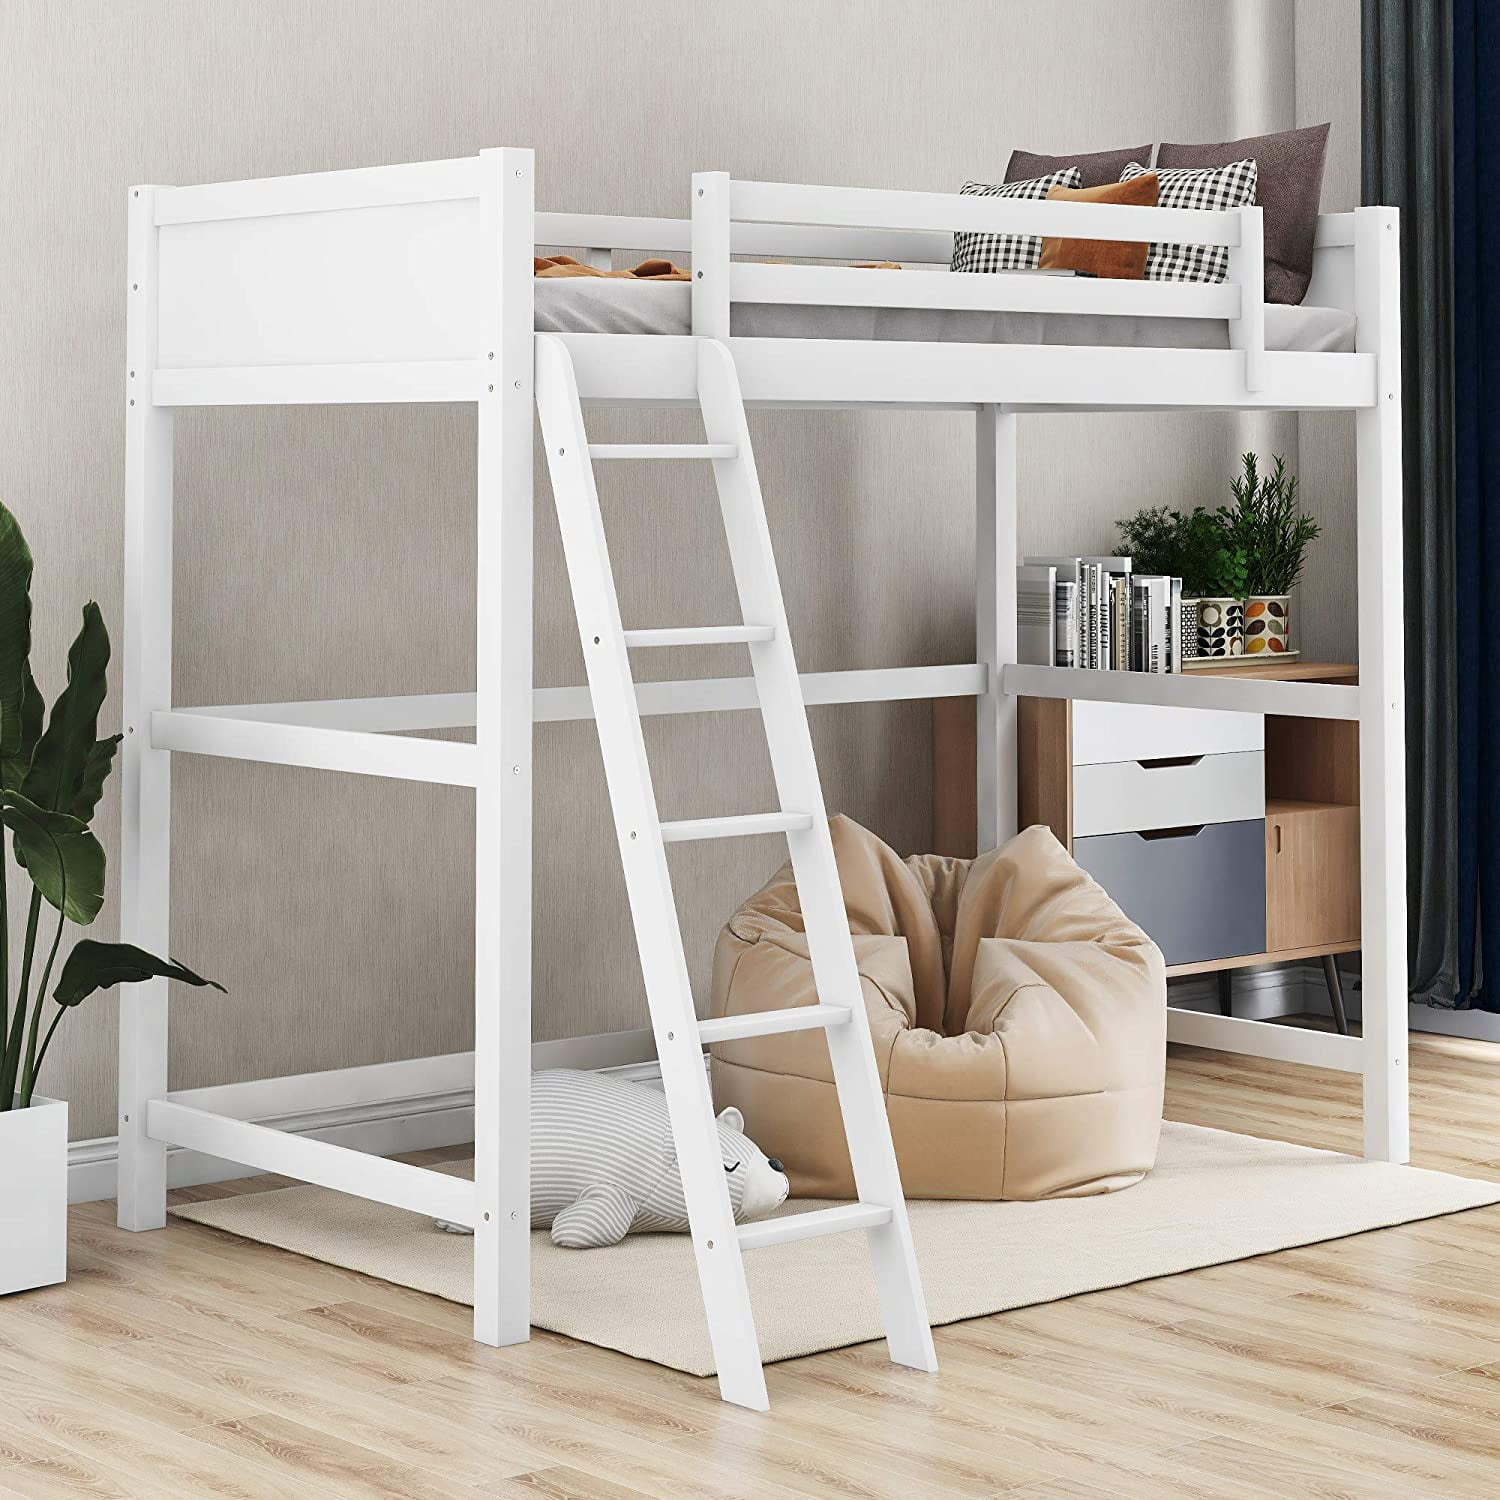 Modernluxe Panel Style Solid Wood Loft, Side By Side Bunk Beds